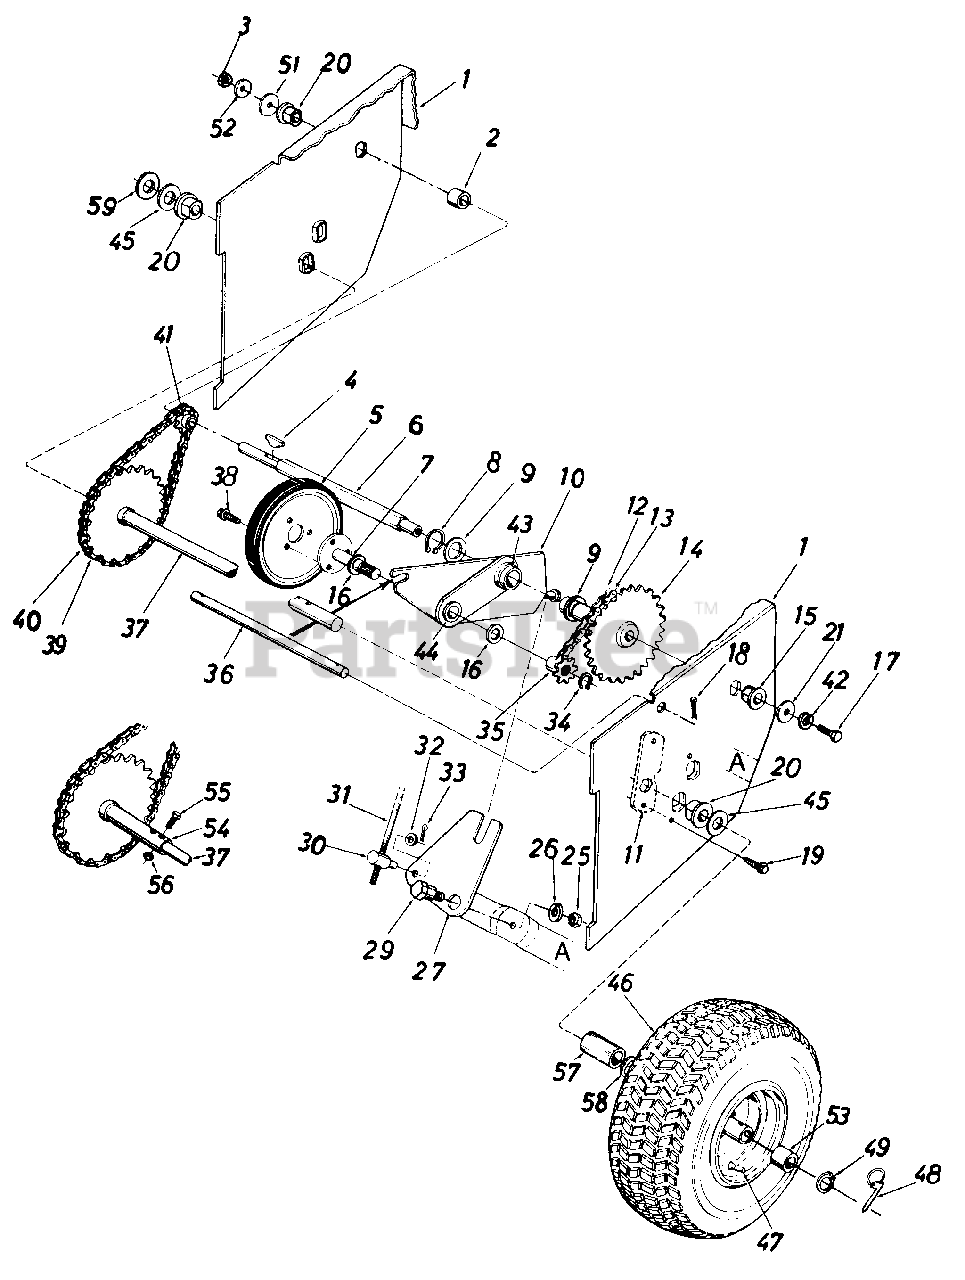 MTD 310355 - MTD Snow Thrower (1990) Snow Parts Lookup with Diagrams